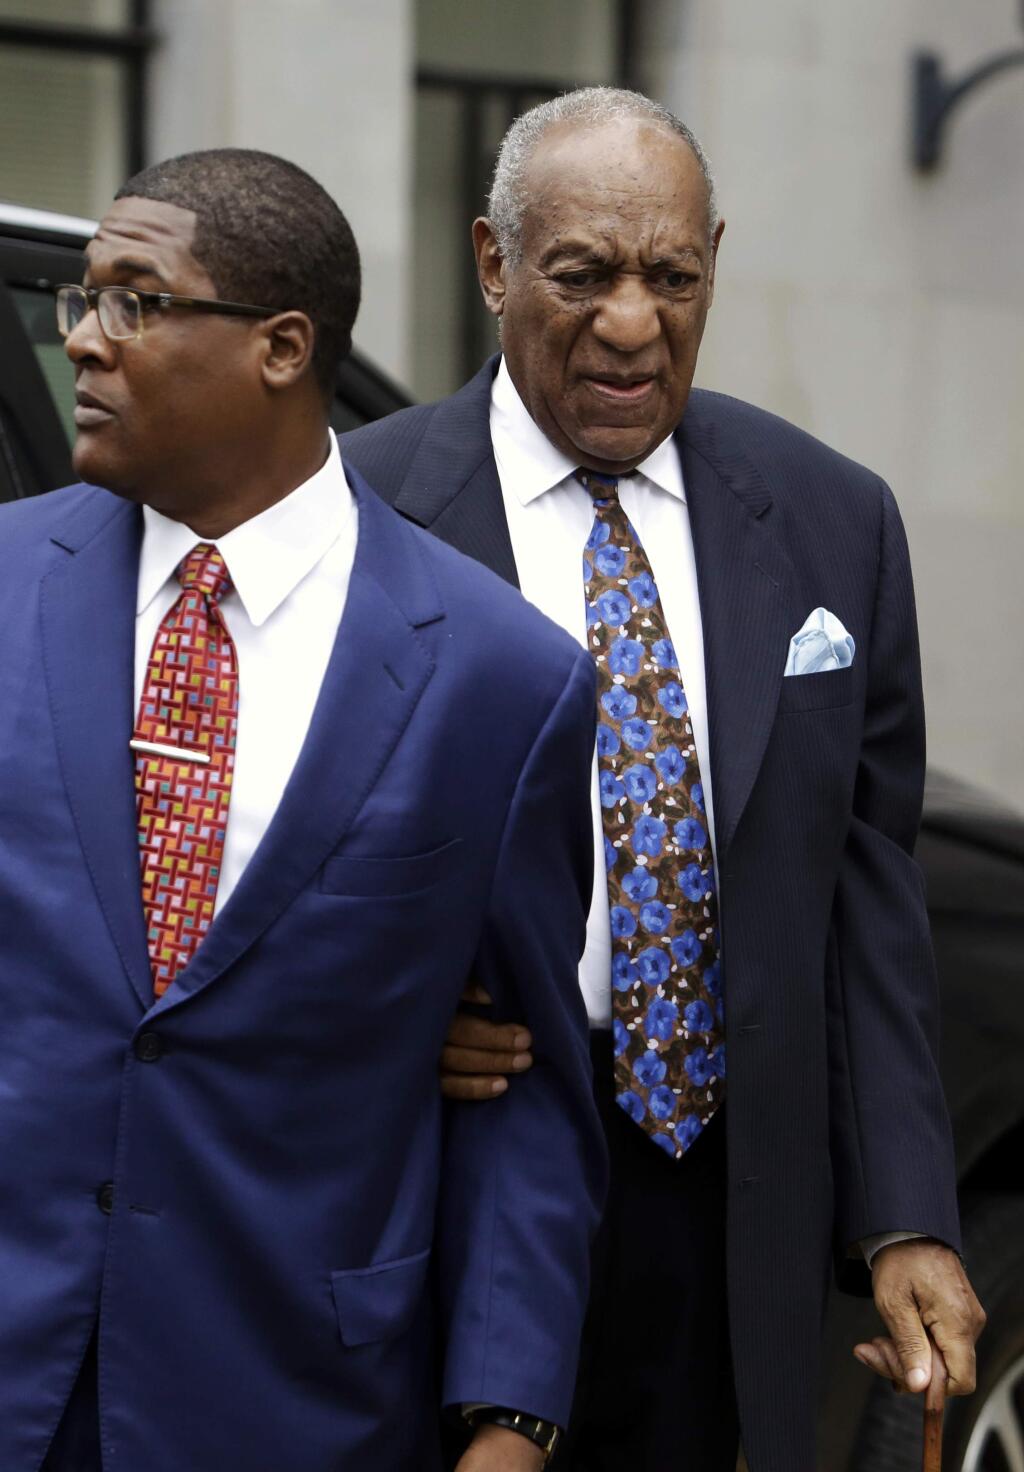 Bill Cosby arrives for his sentencing hearing at the Montgomery County Courthouse, Monday, Sept. 24, 2018, in Norristown, Pa. (AP Photo/Jacqueline Larma)